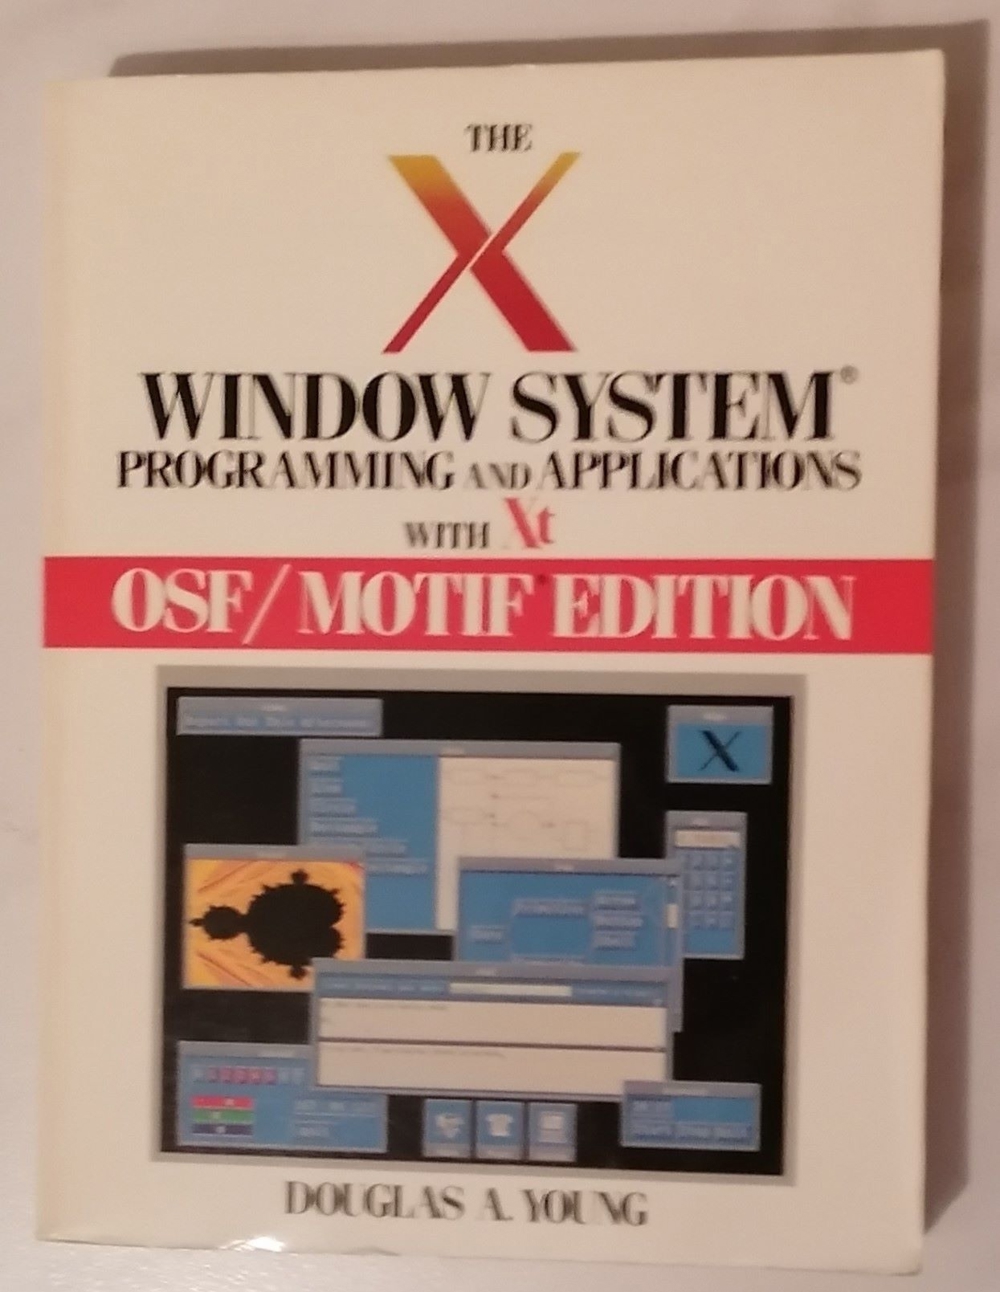 The X Window System Programming and Applications with Xt OSF/MOTIF